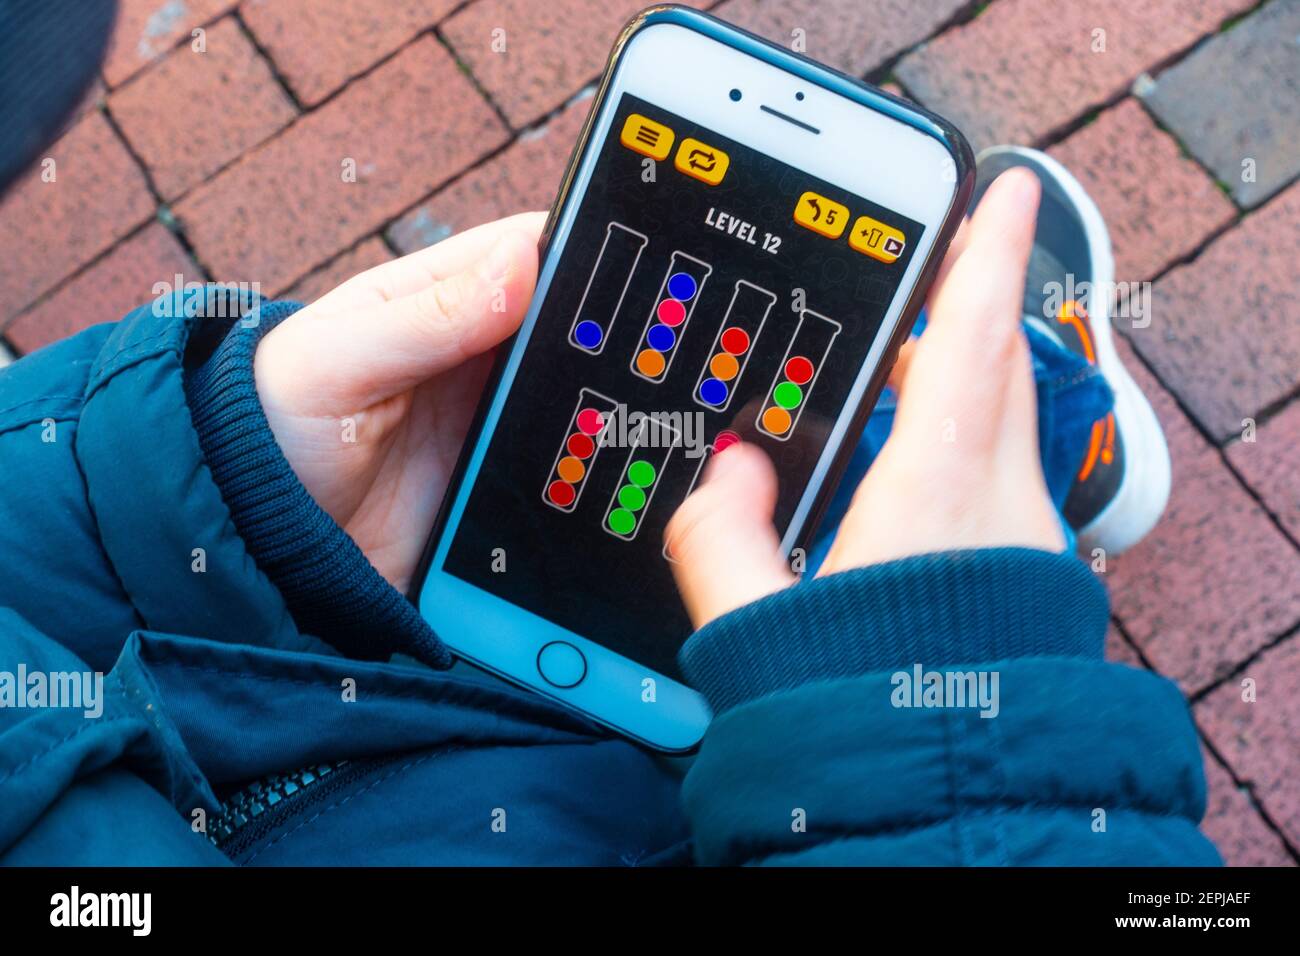 Looking down at a child's hands playing a game on an iPhone smartphone. Stock Photo